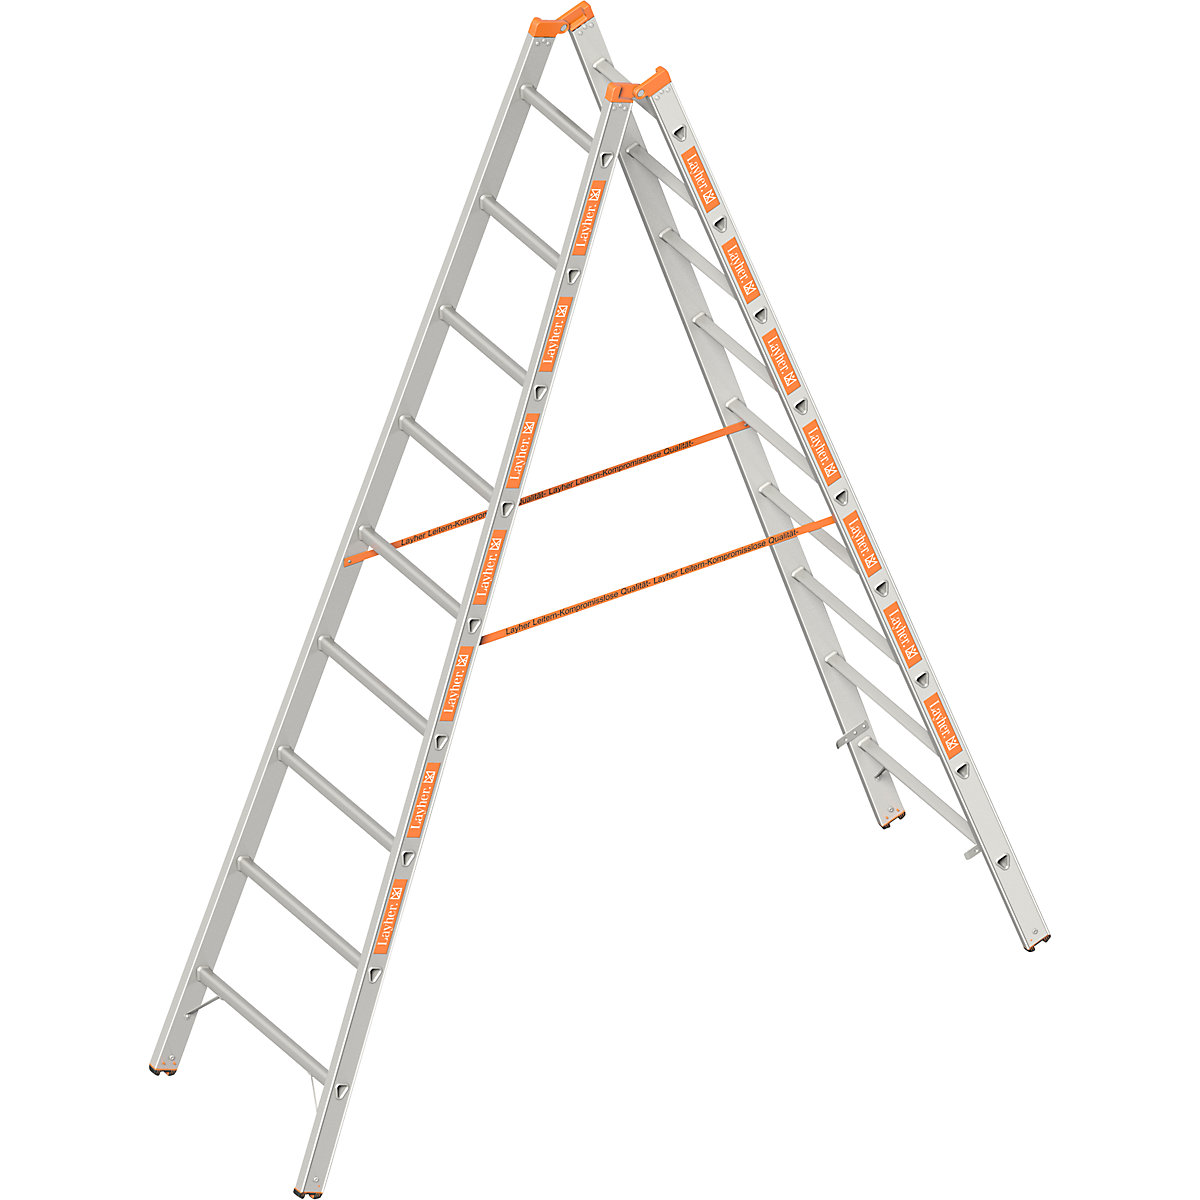 Double sided rung ladder – Layher, double sided access, 2 x 9 rungs-7